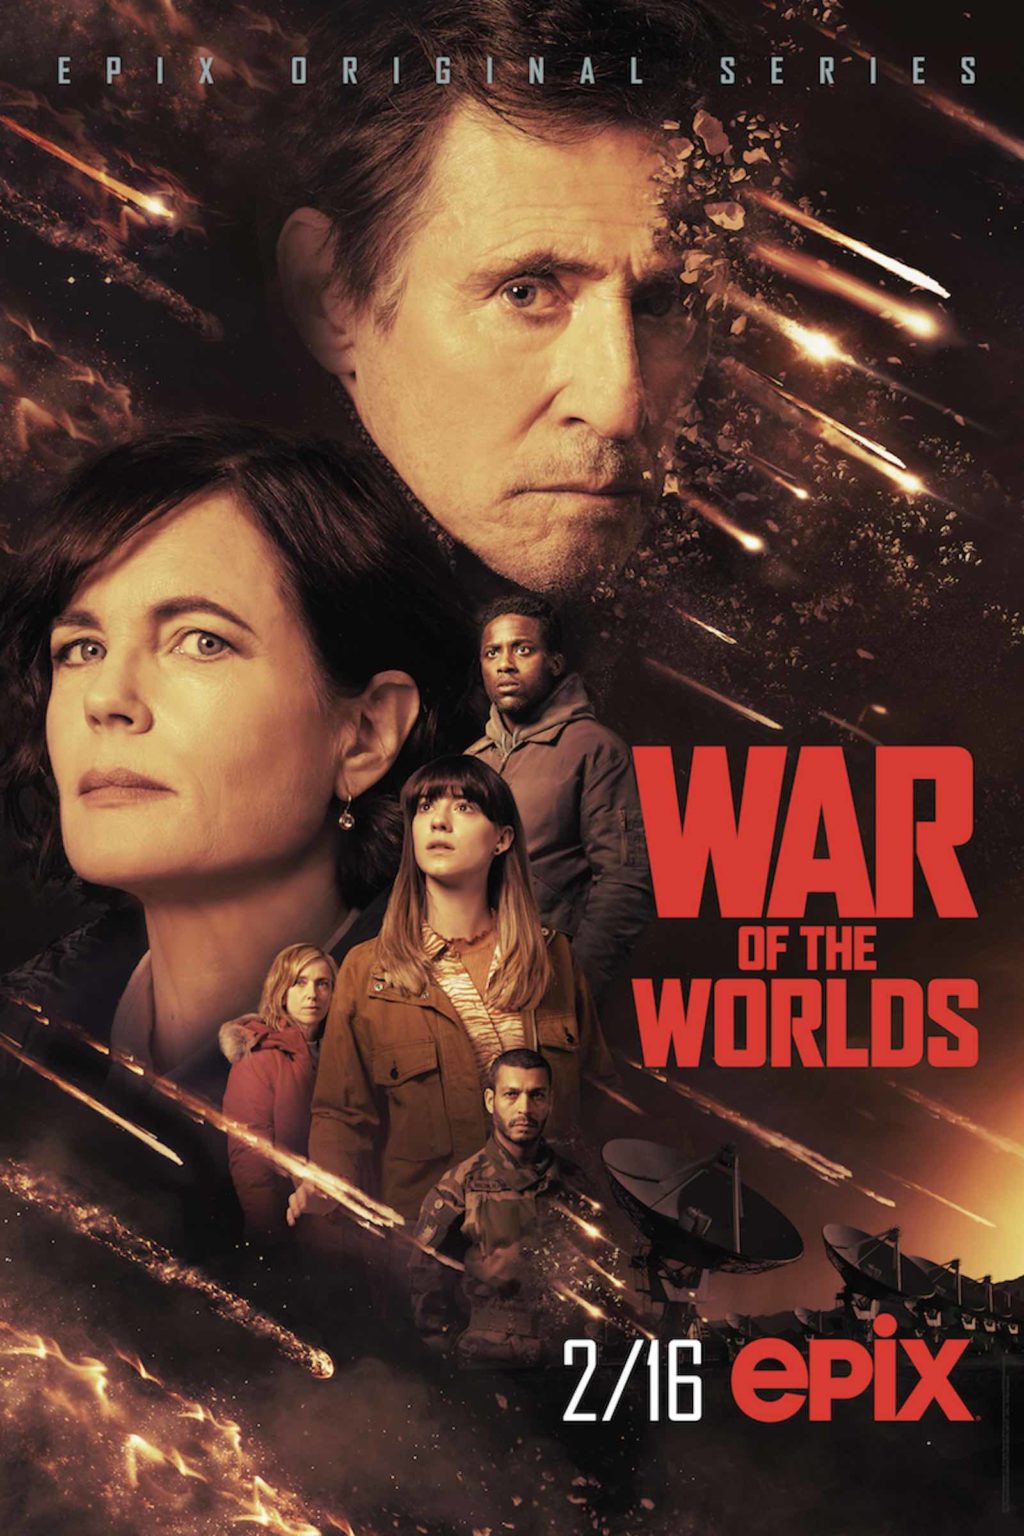 EPIX is giving the classic H.G. Wells story 'War of the Worlds' a modern update. We’re lucky enough to get this exclusive clip from the new series.